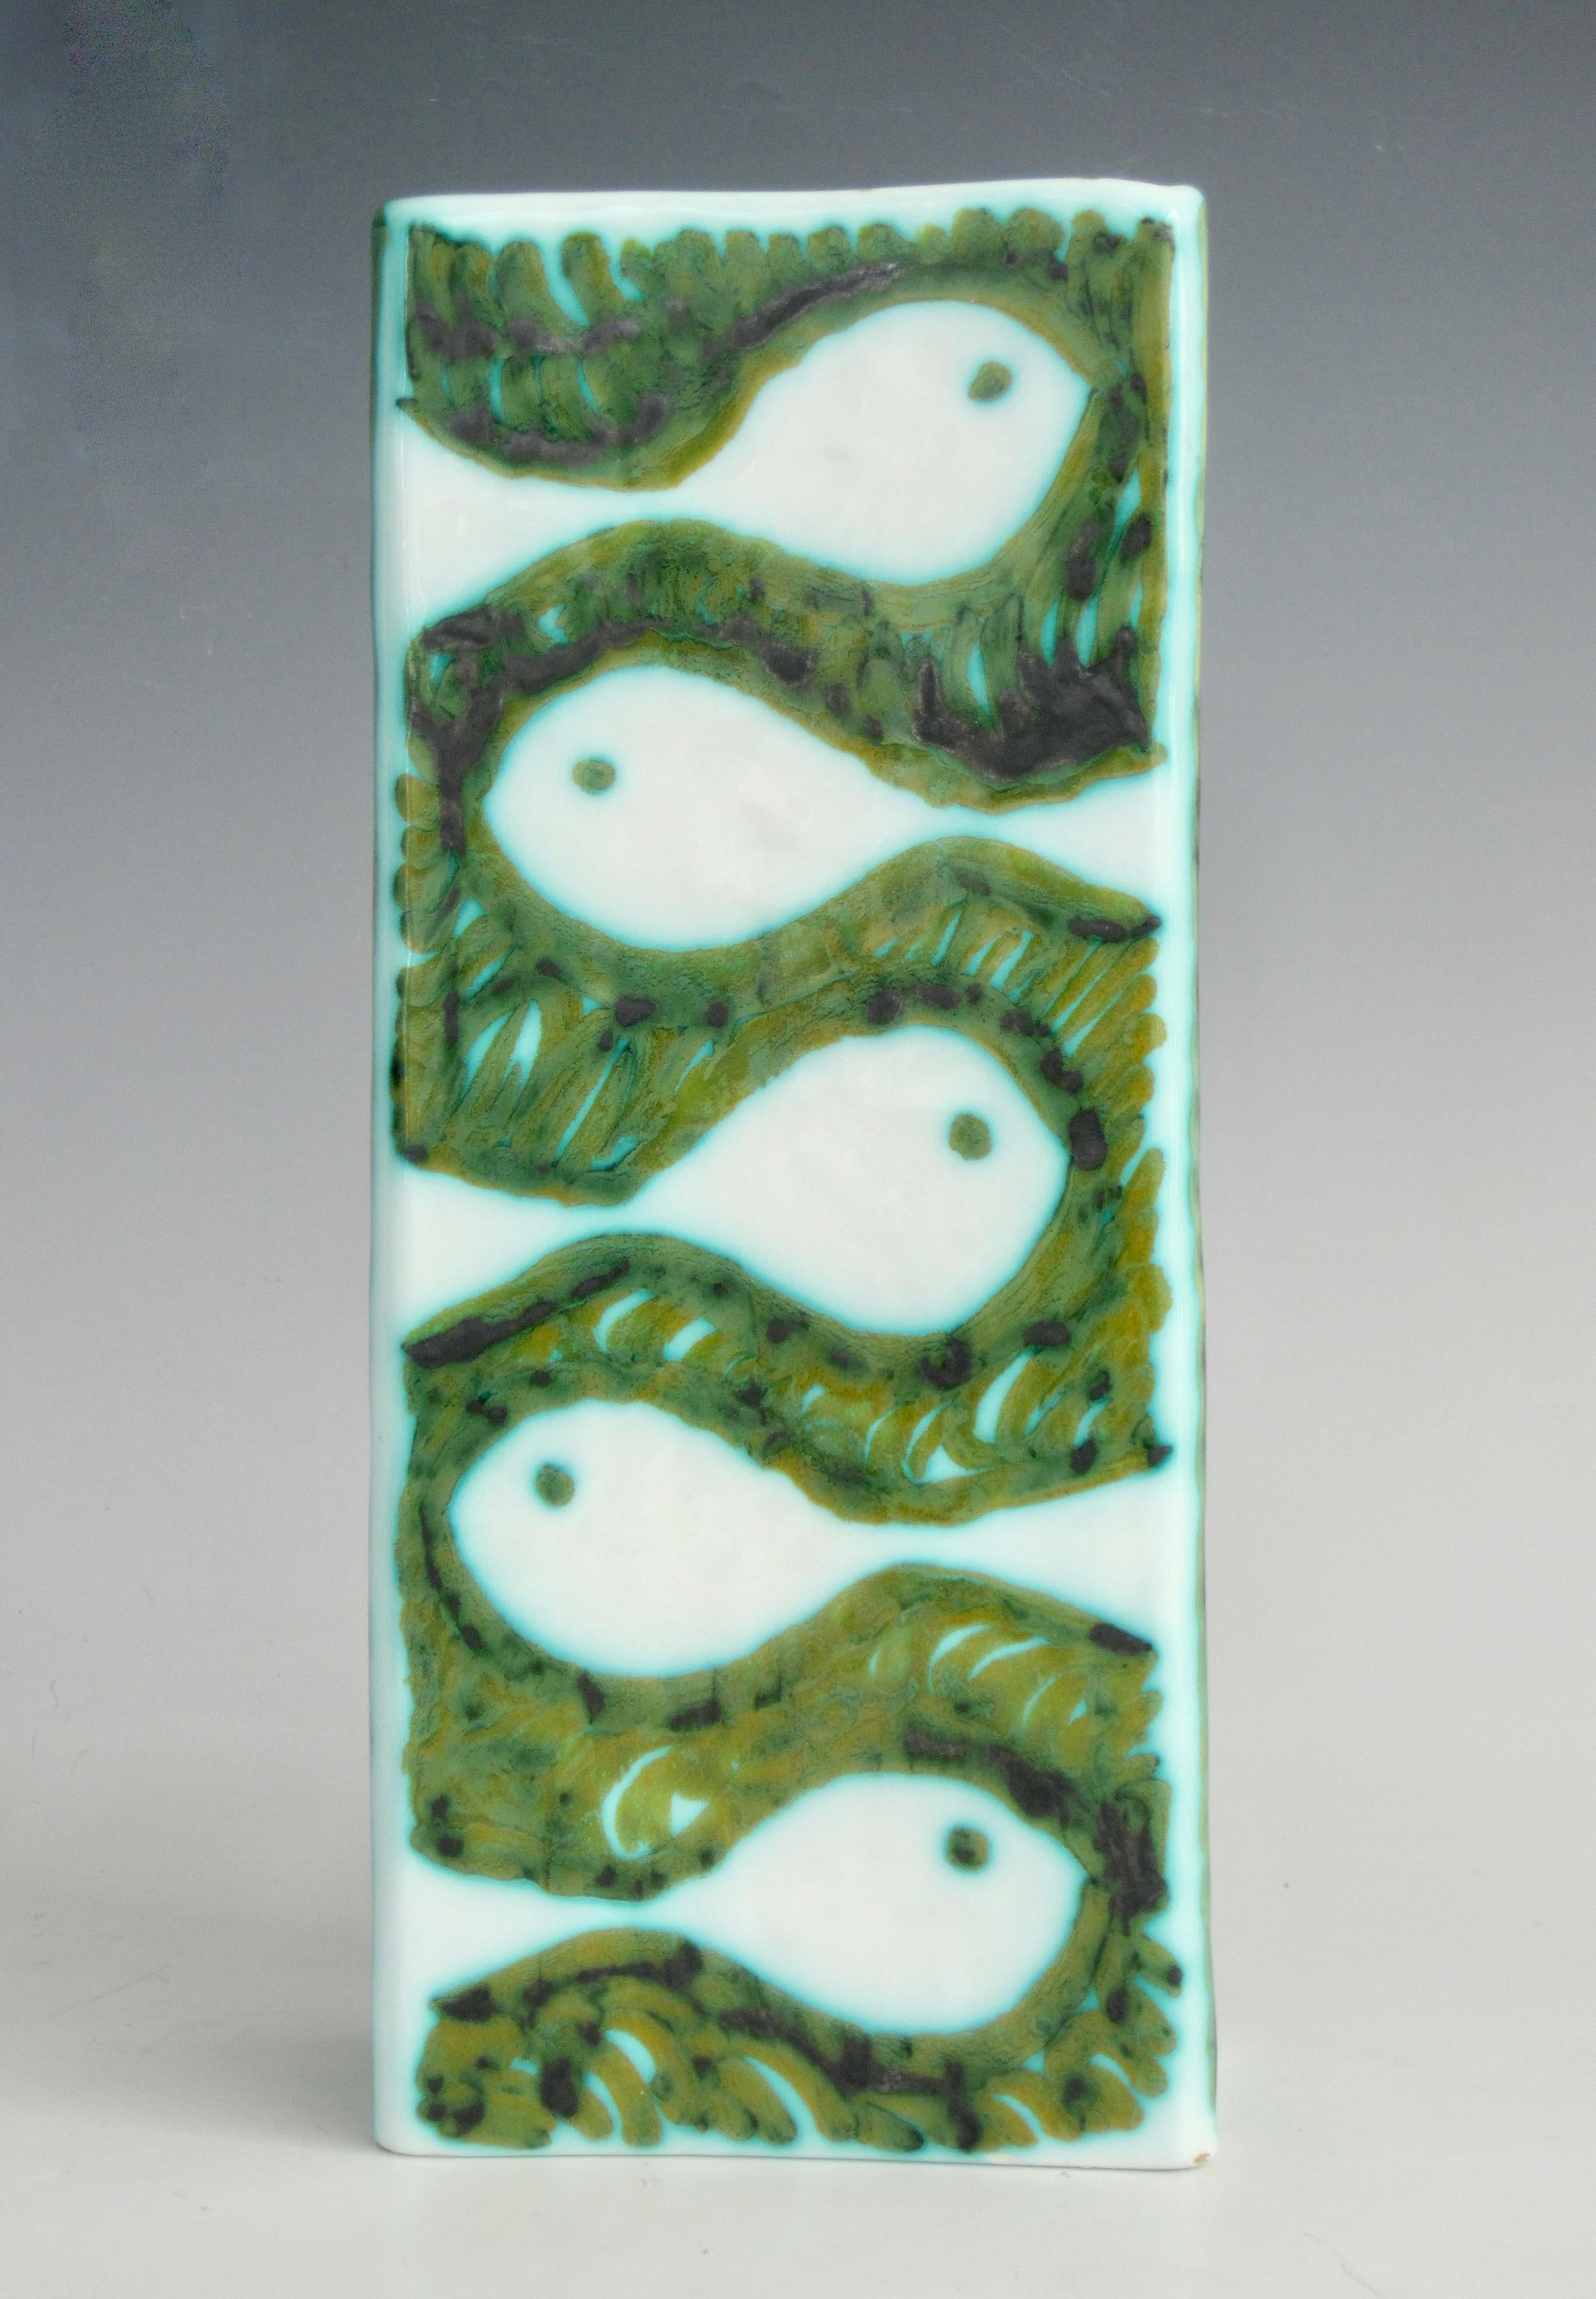 Alessio Tasca for Raymor double sided rectangular ceramic vase. Strokes of green, black, ochre, and turquoise create the shapes of fish
on one side, doves on the other and lines where the four sides come together.
Signed 1456 Tasca Per Raymor Italia